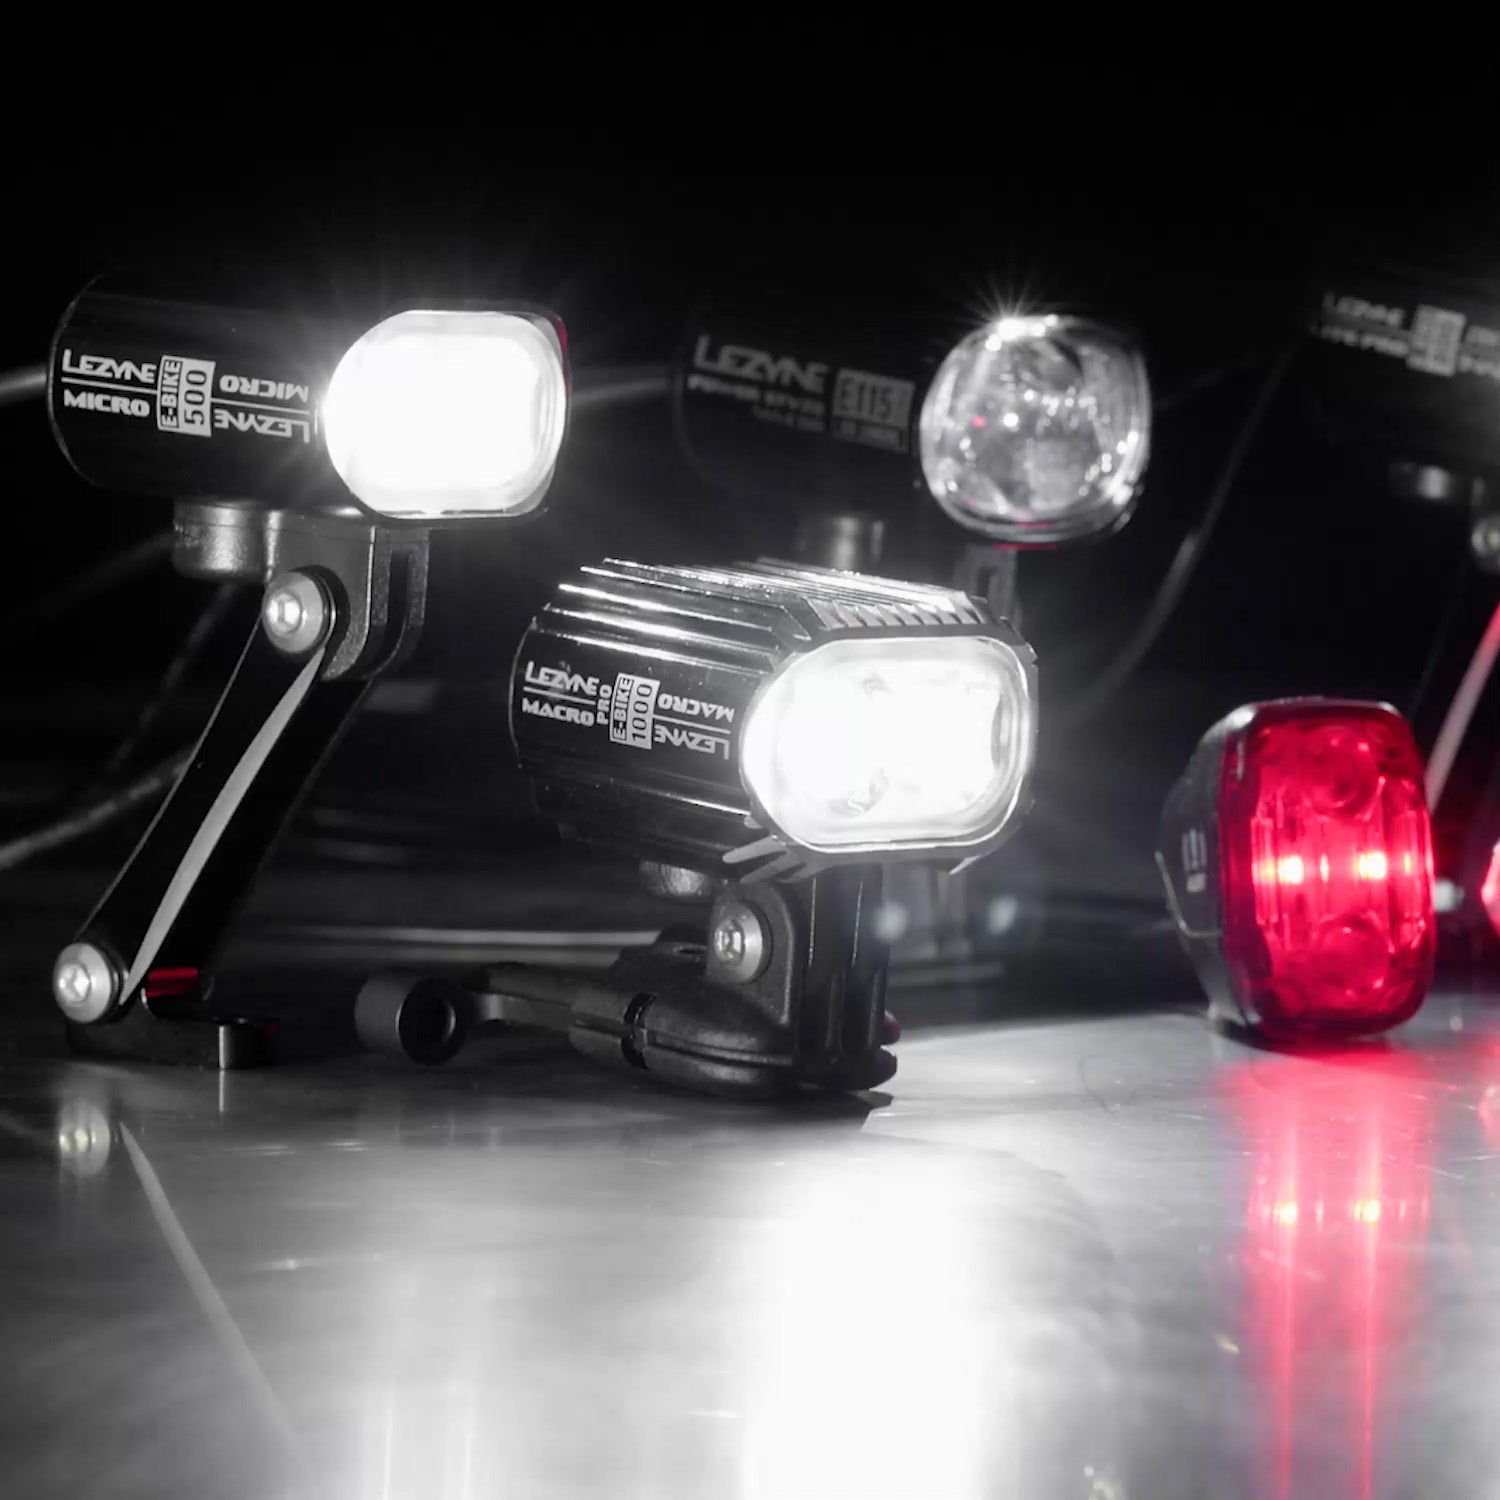 Several lights on a surface. Lezyne Micro E-Bike 500 can be seen printed on the side of one of them.